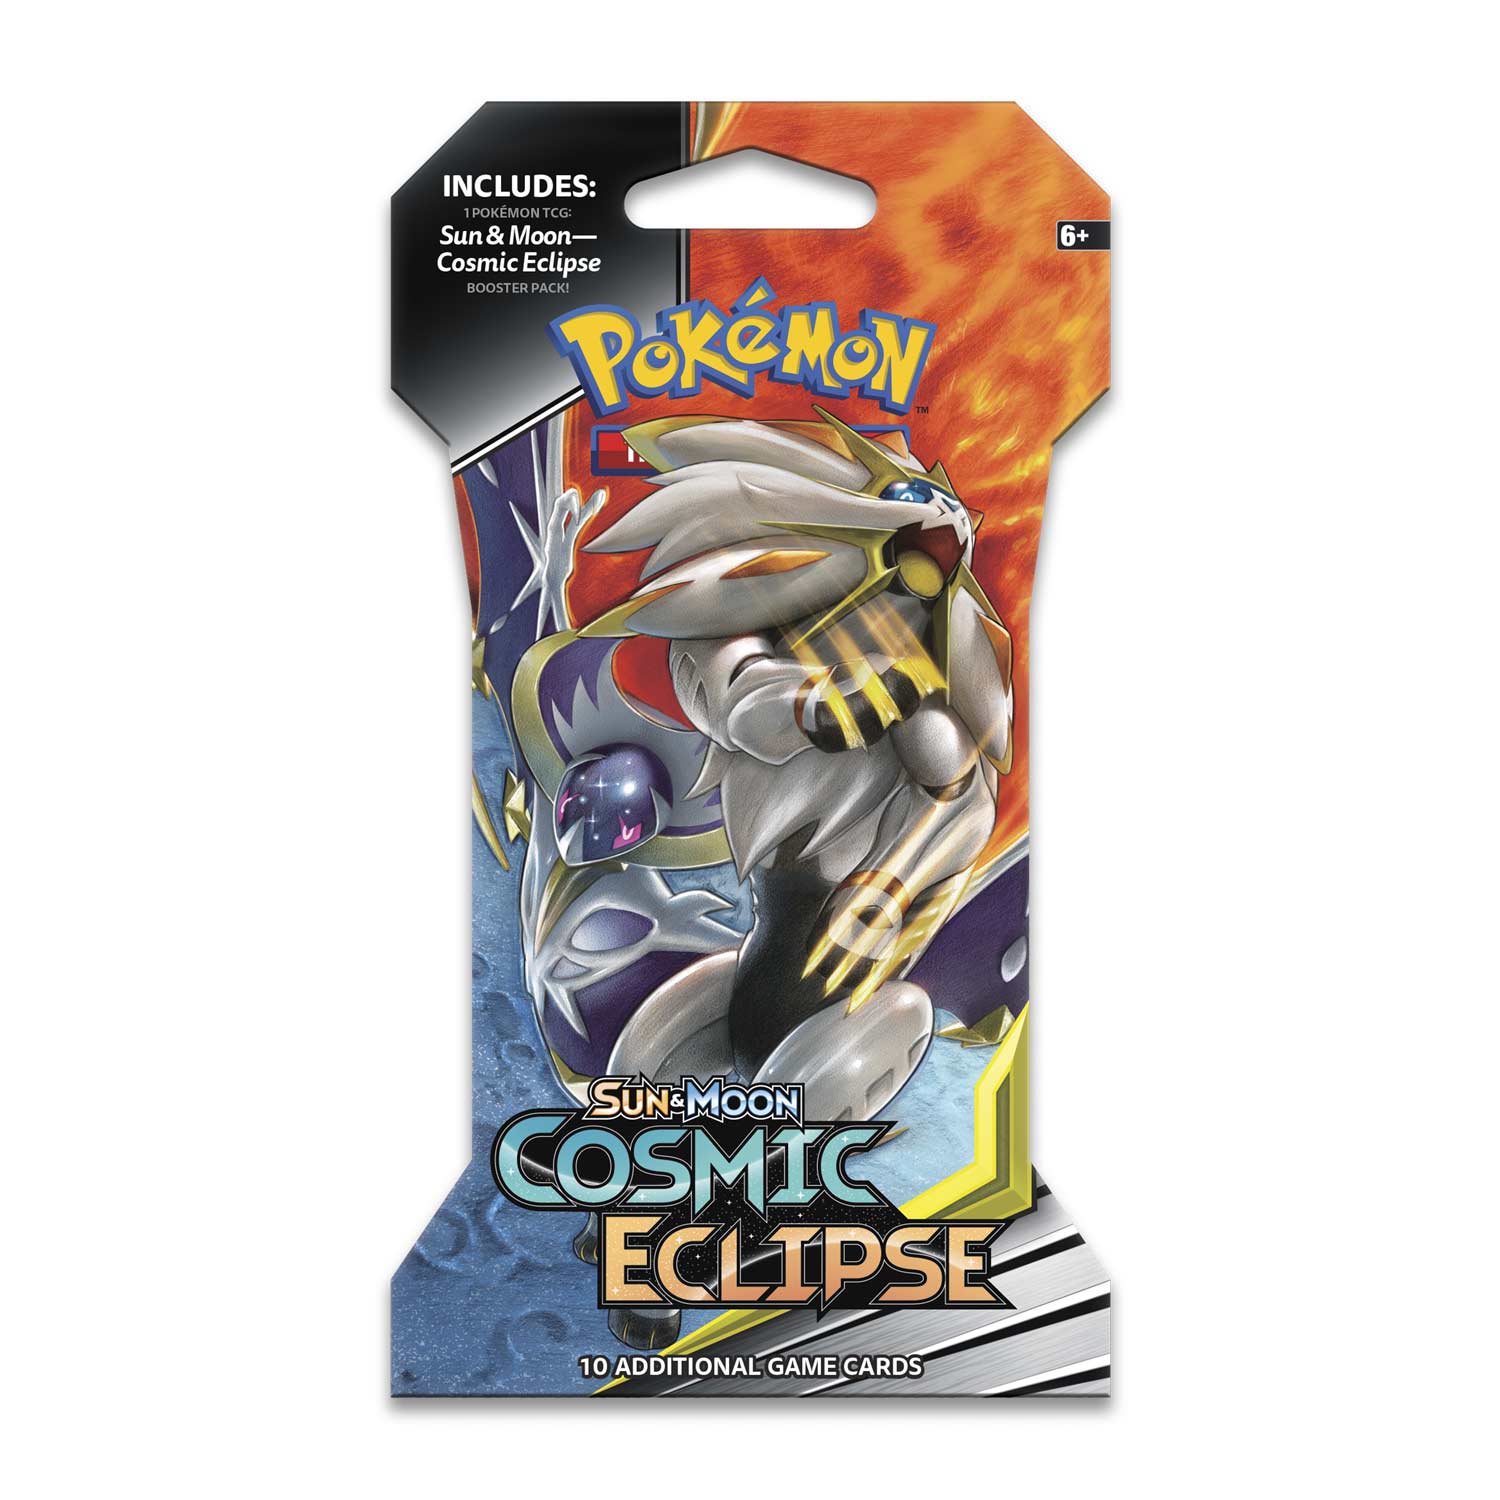 1 POKEMON TCG SUN & MOON COSMIC ECLIPSE Sleeved Booster Pack New OUT of PRINT 